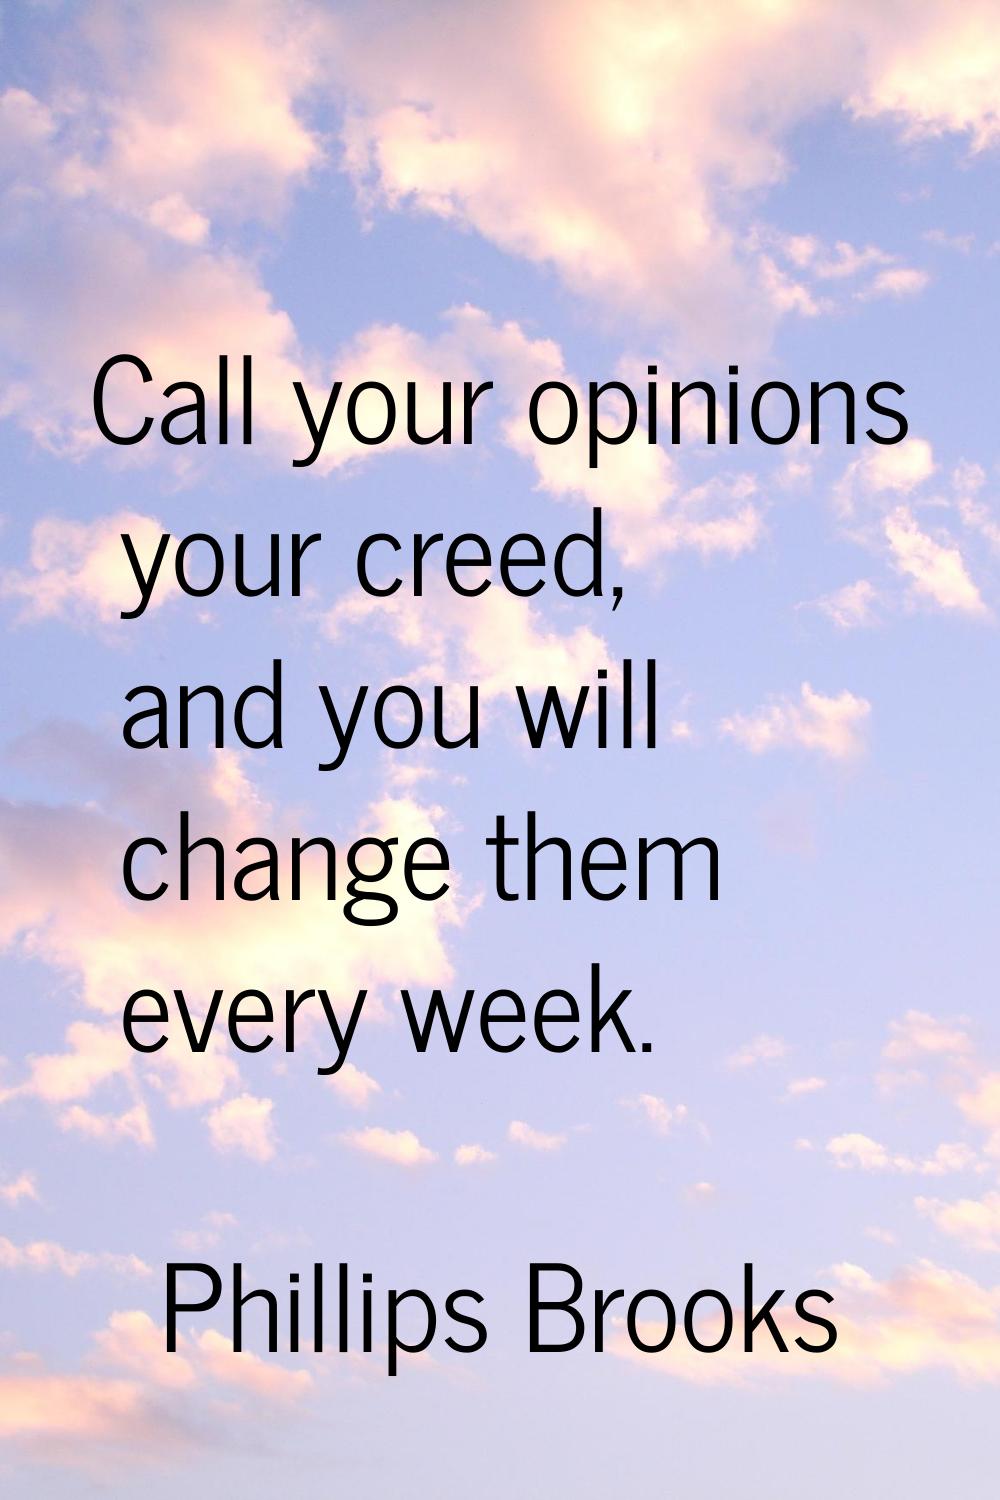 Call your opinions your creed, and you will change them every week.